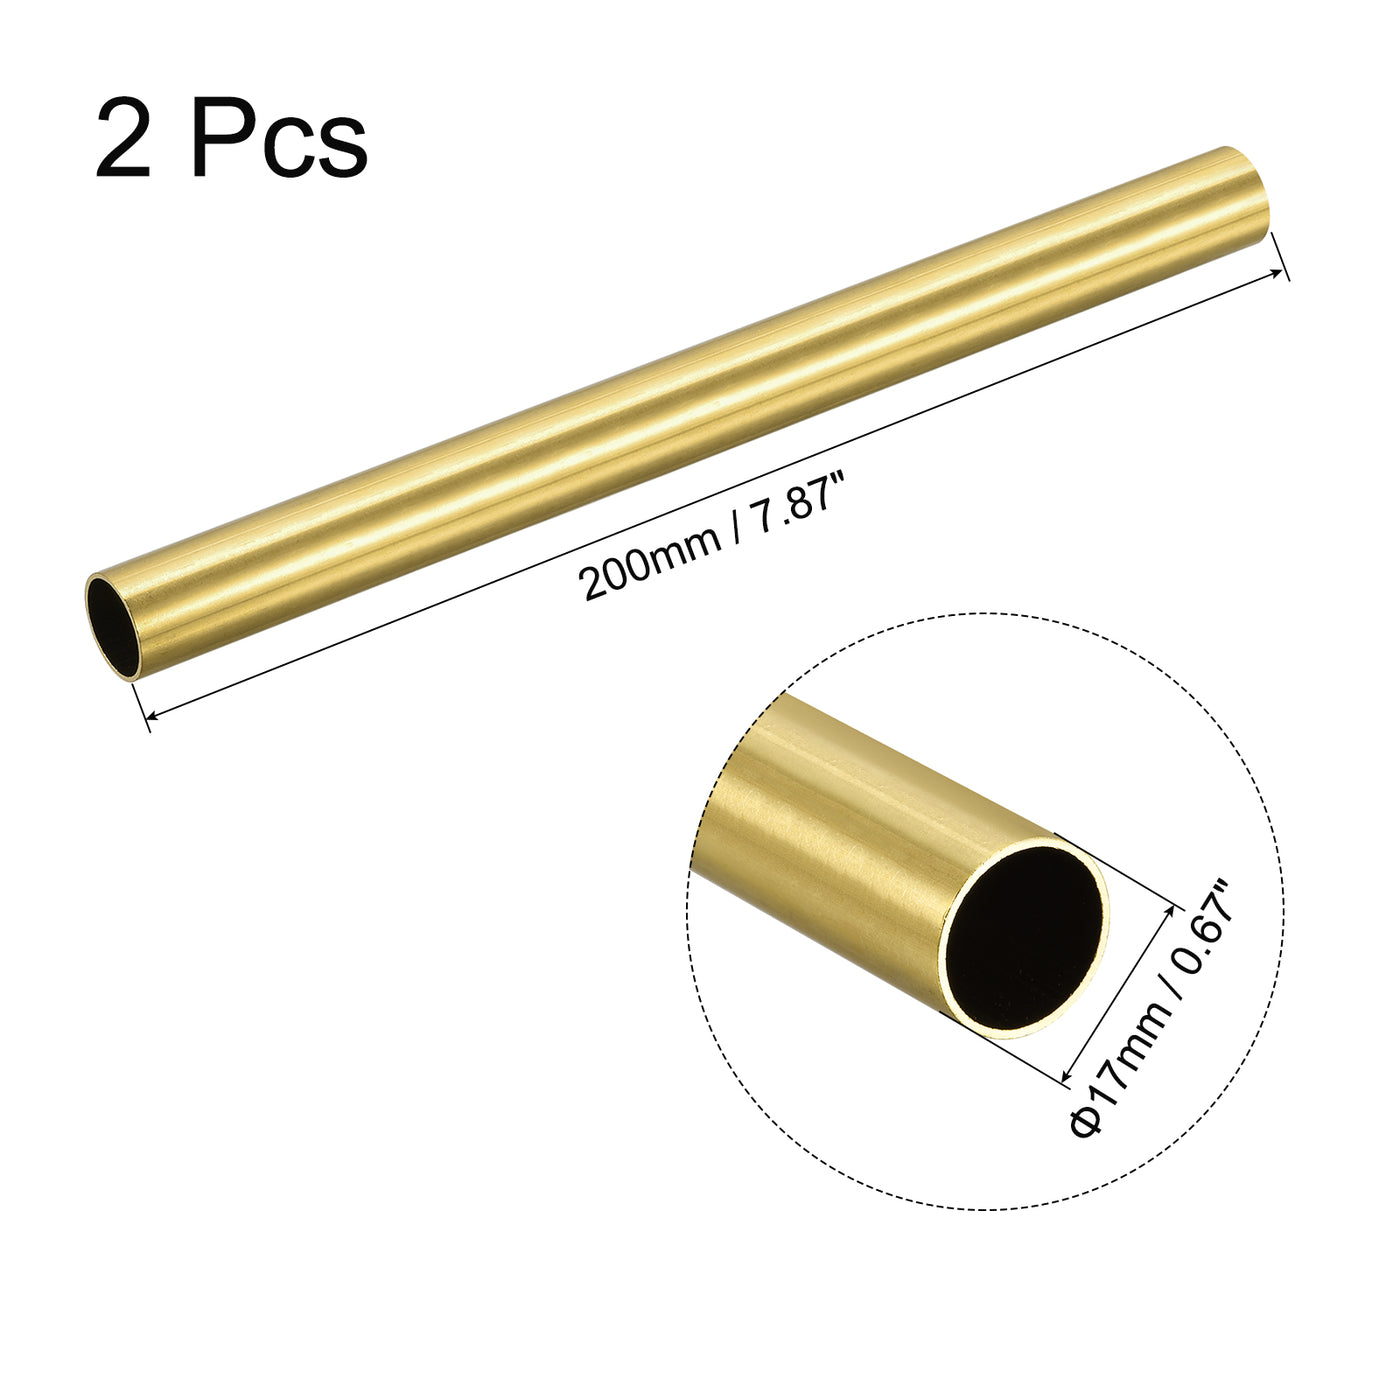 Uxcell Uxcell Brass Round Tube 11mm OD 1mm Wall Thickness 200mm Length Pipe Tubing 2 Pcs